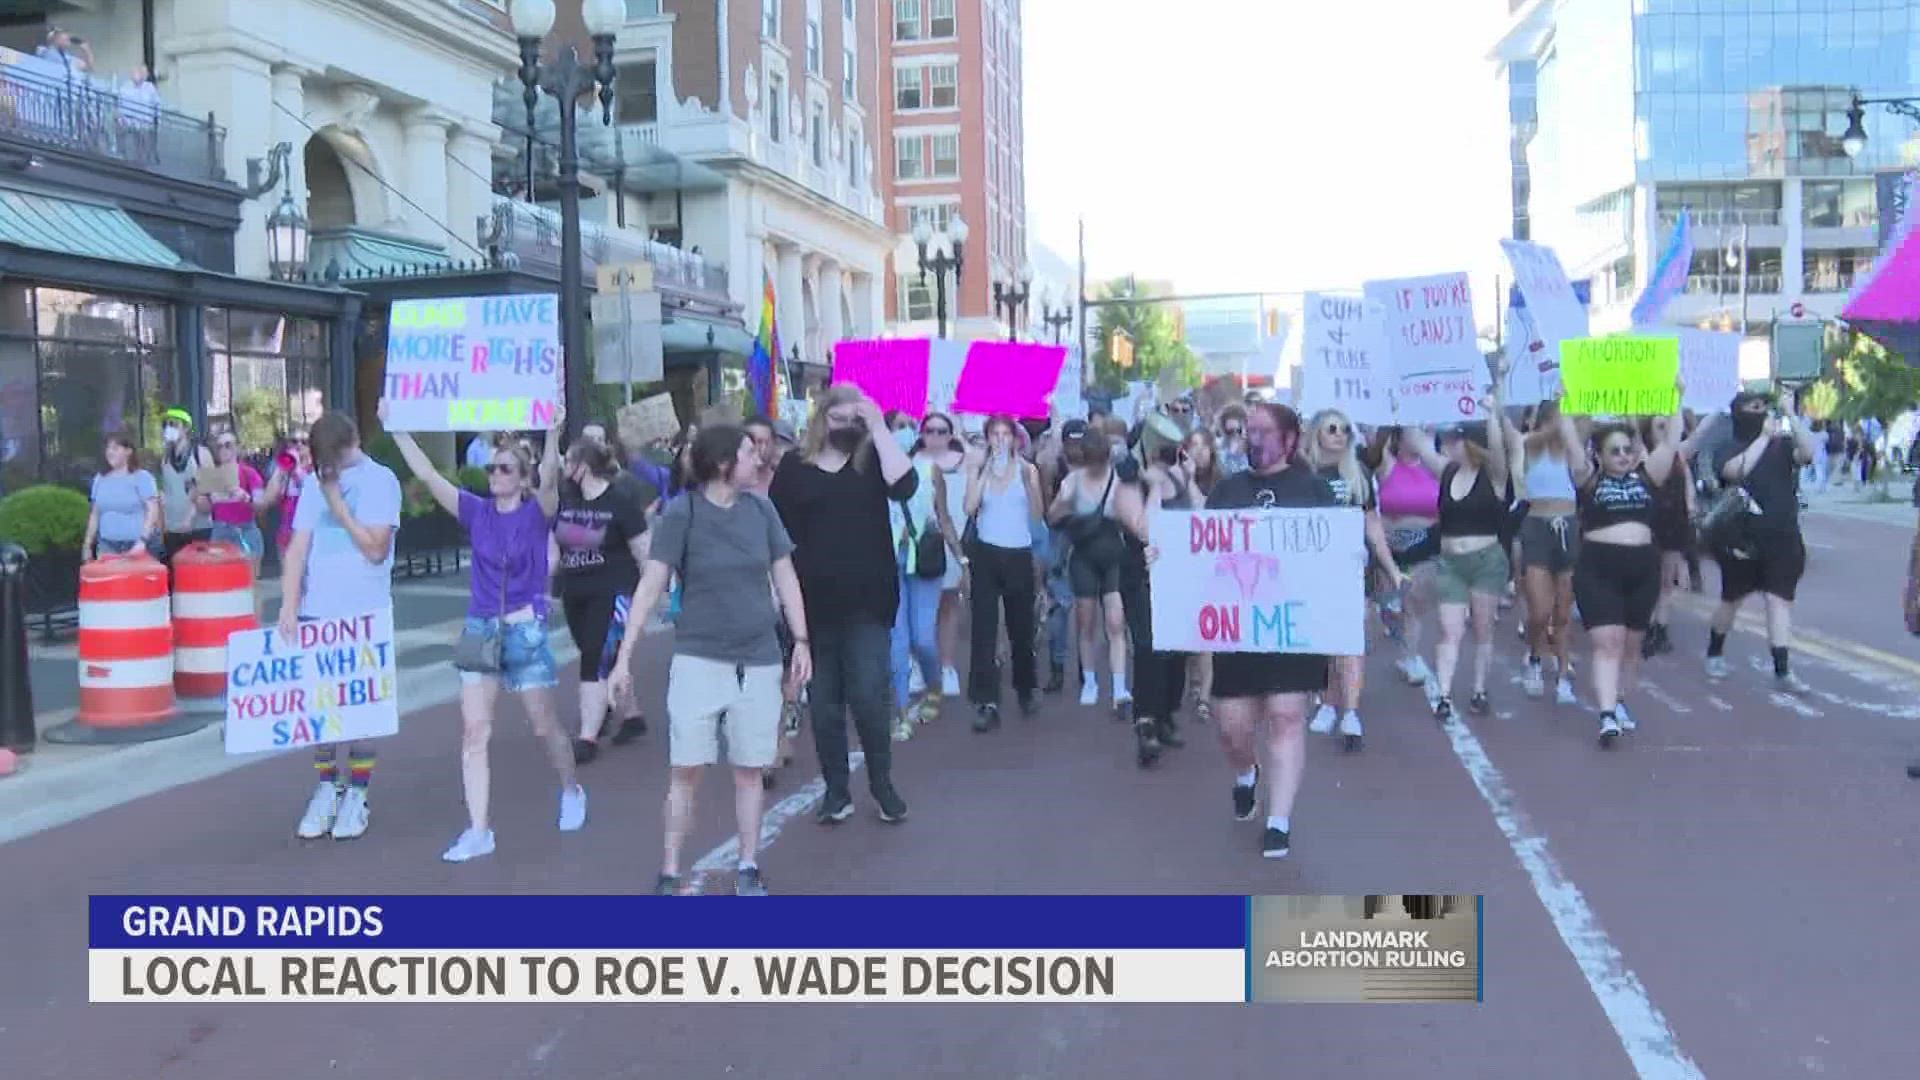 One demonstration started at Monument Park, where one volunteer aimed to collect signatures to get reproductive rights on the November ballot.